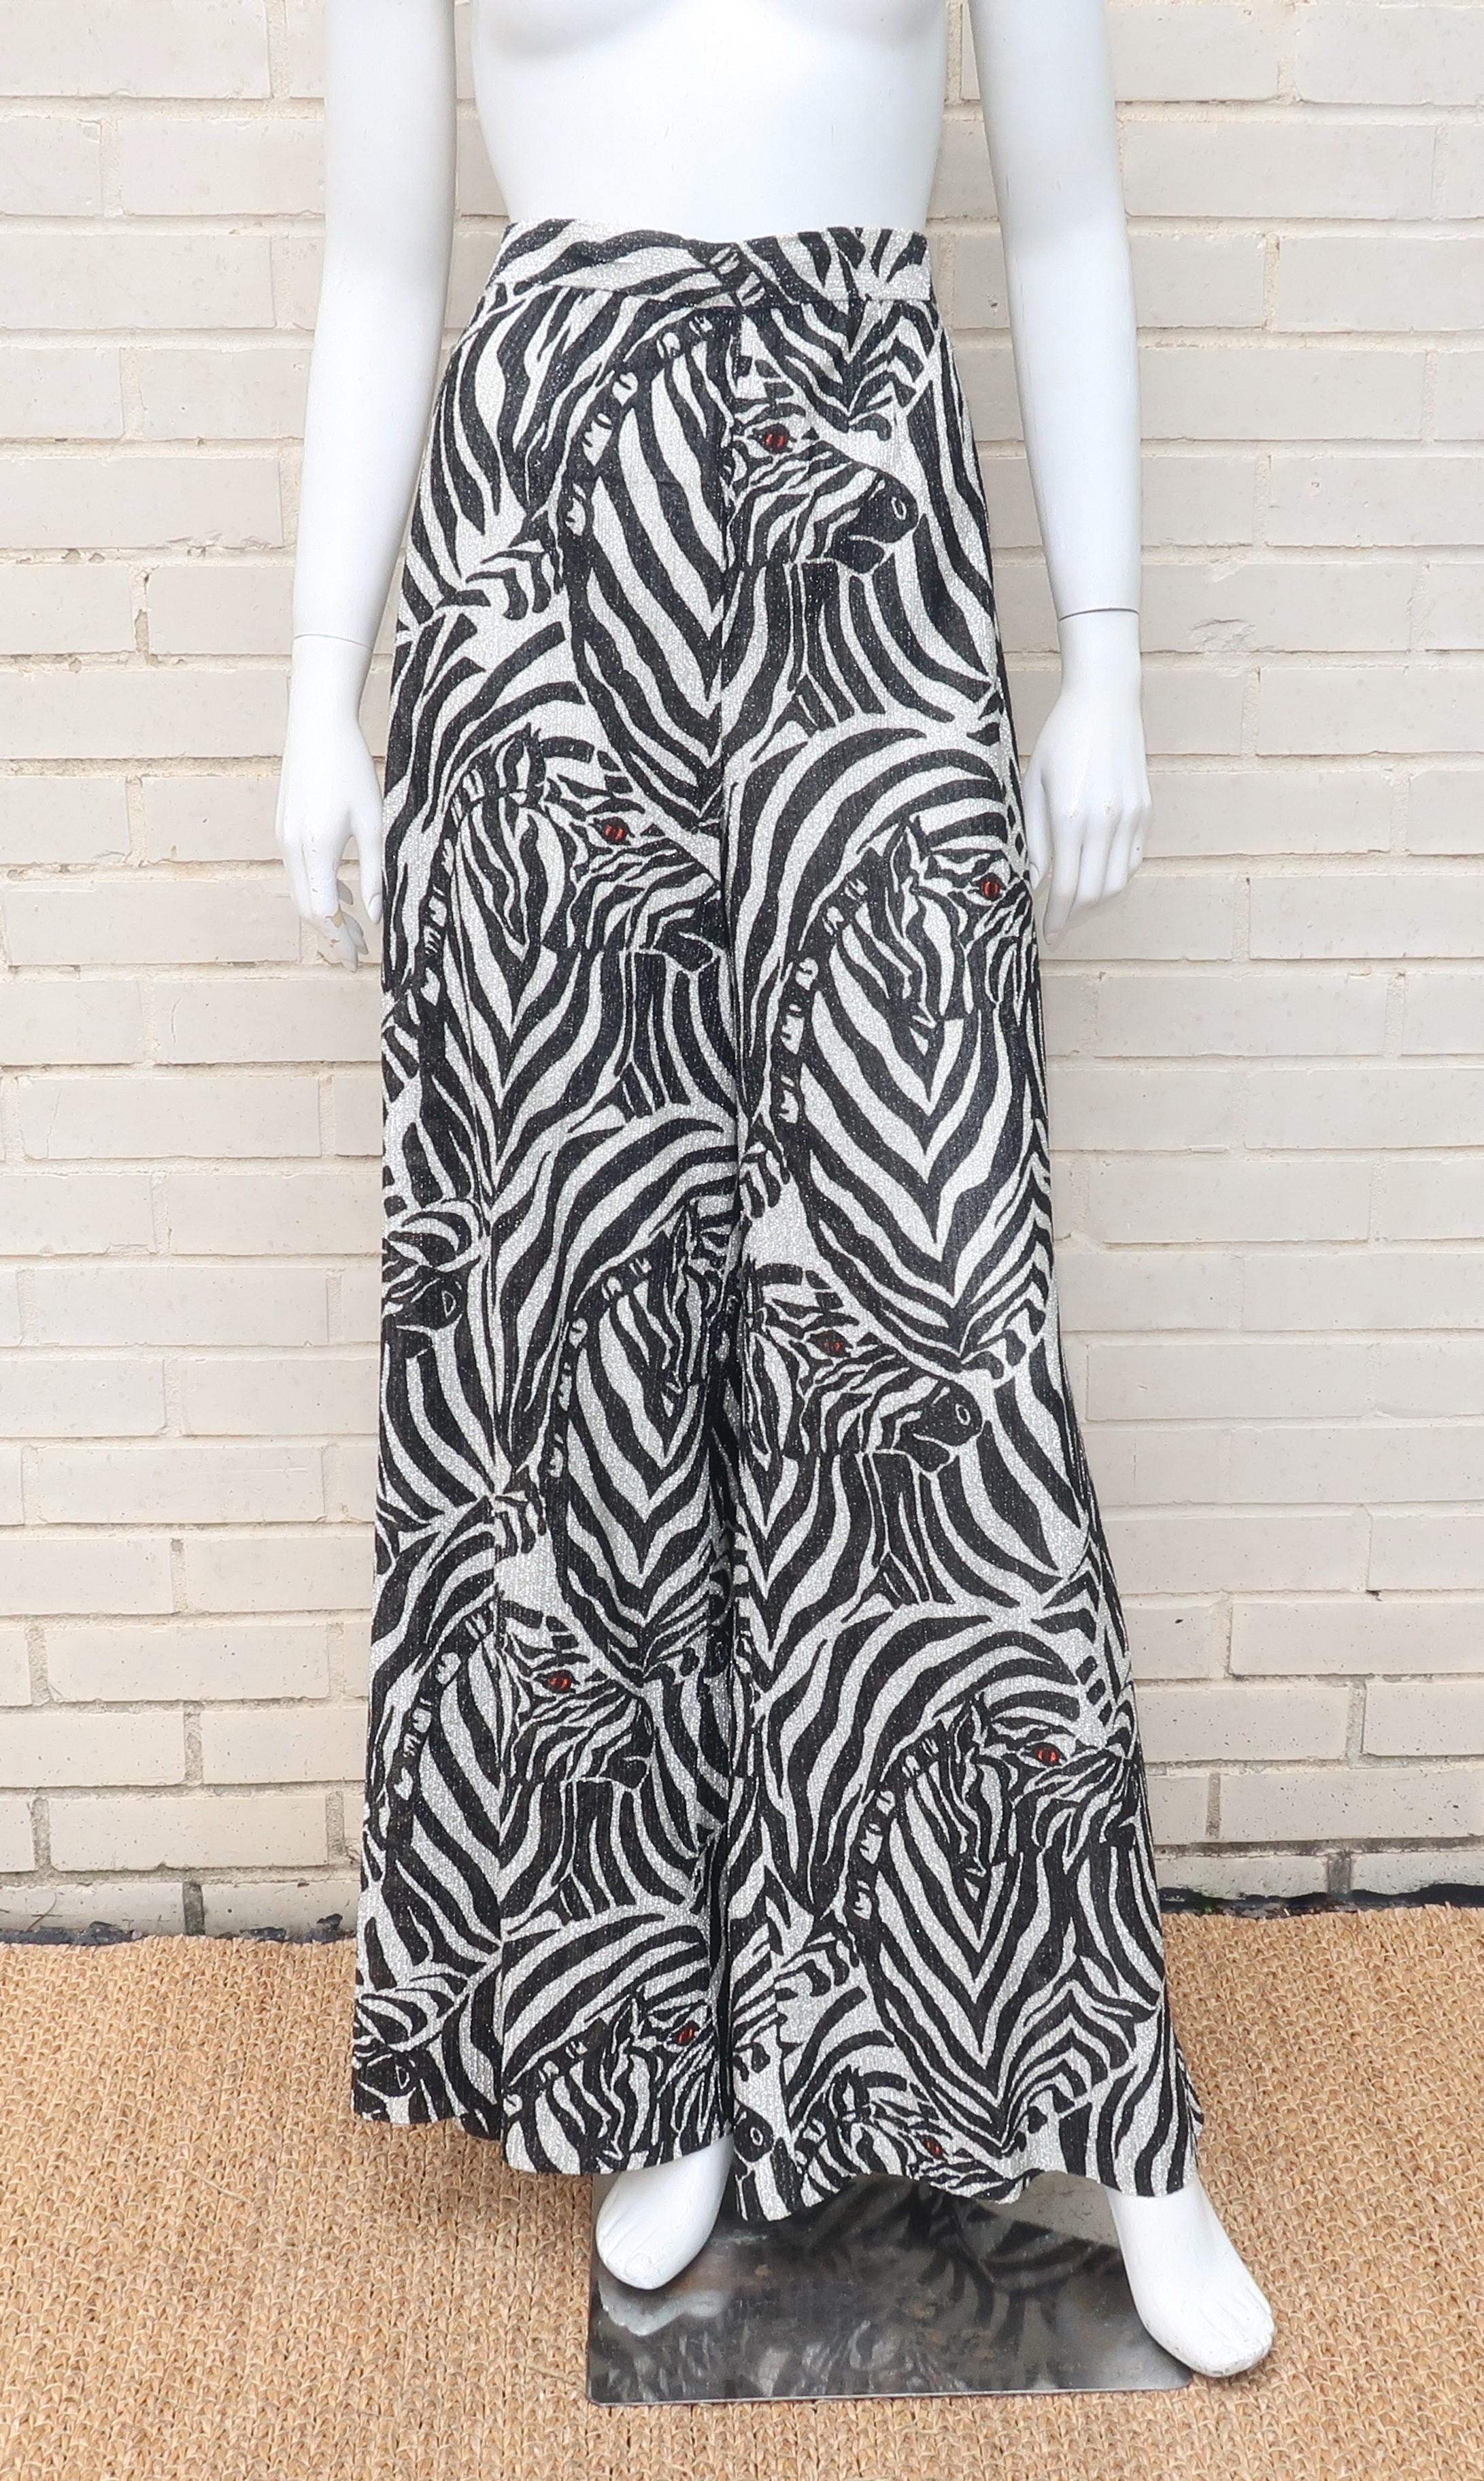 Channel your inner wild child with this fabulously fun pair of 1970's zebra print silver lamé palazzo pants.  The high waist pants zip and hook at the back with a smooth fit at the hips flaring to wide legs full enough to create the appearance of a